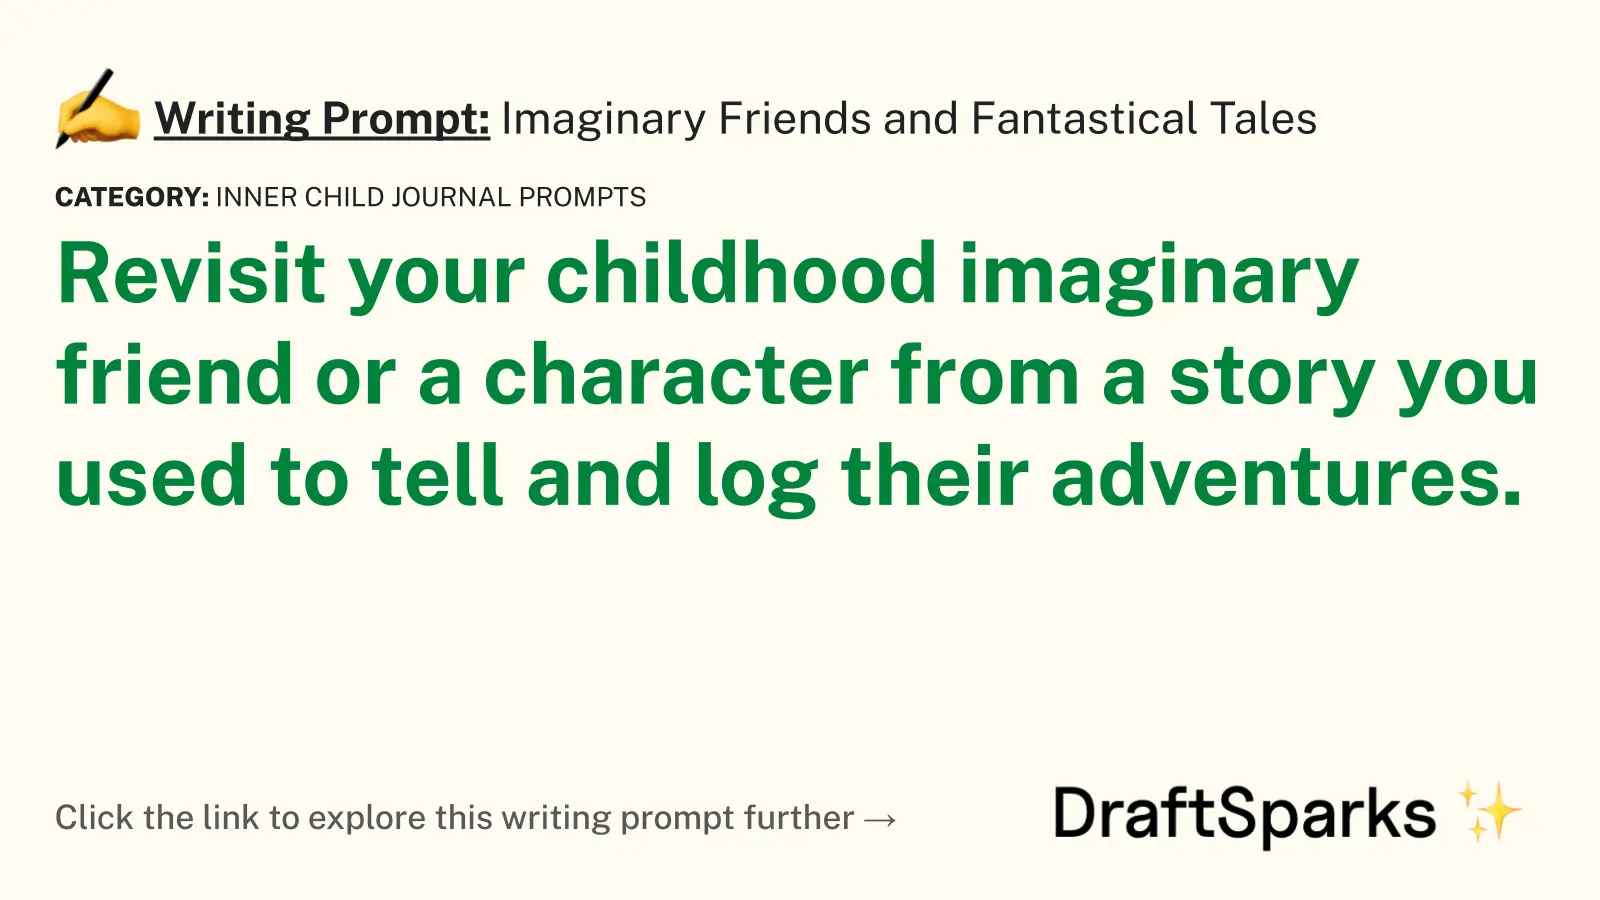 Imaginary Friends and Fantastical Tales